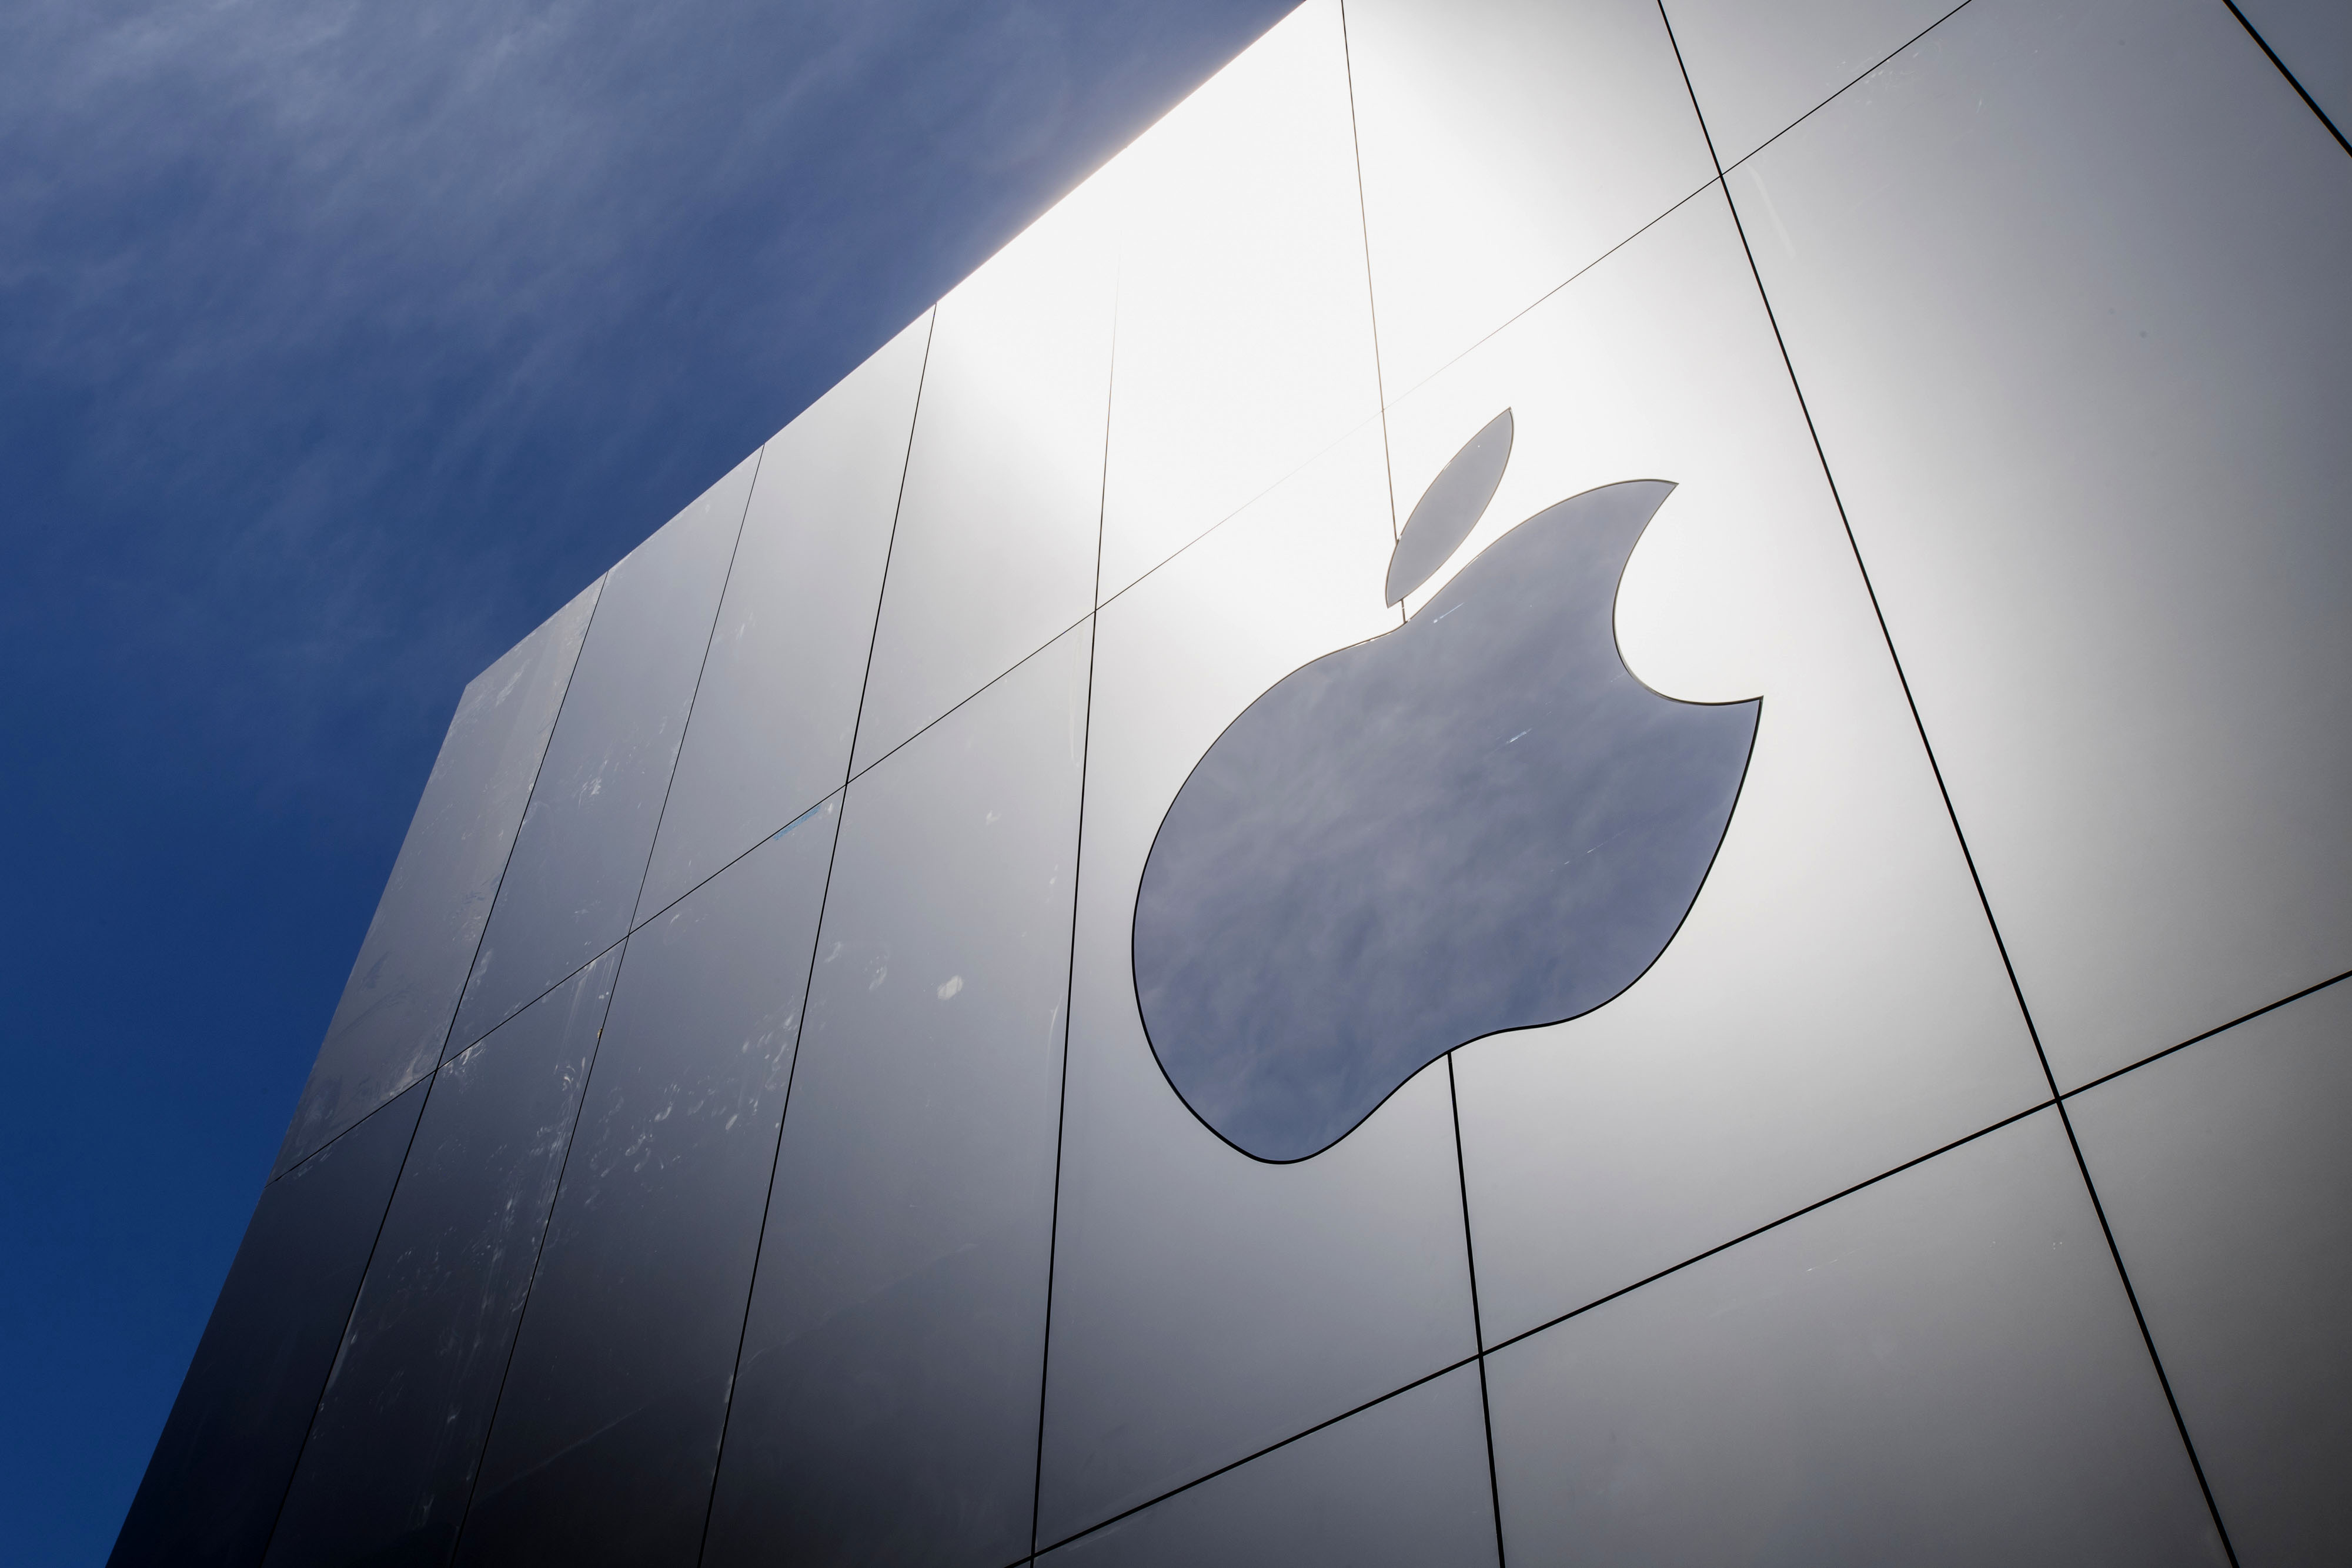 Apple-Branded Health Hardware Products' Teased in Job Listing